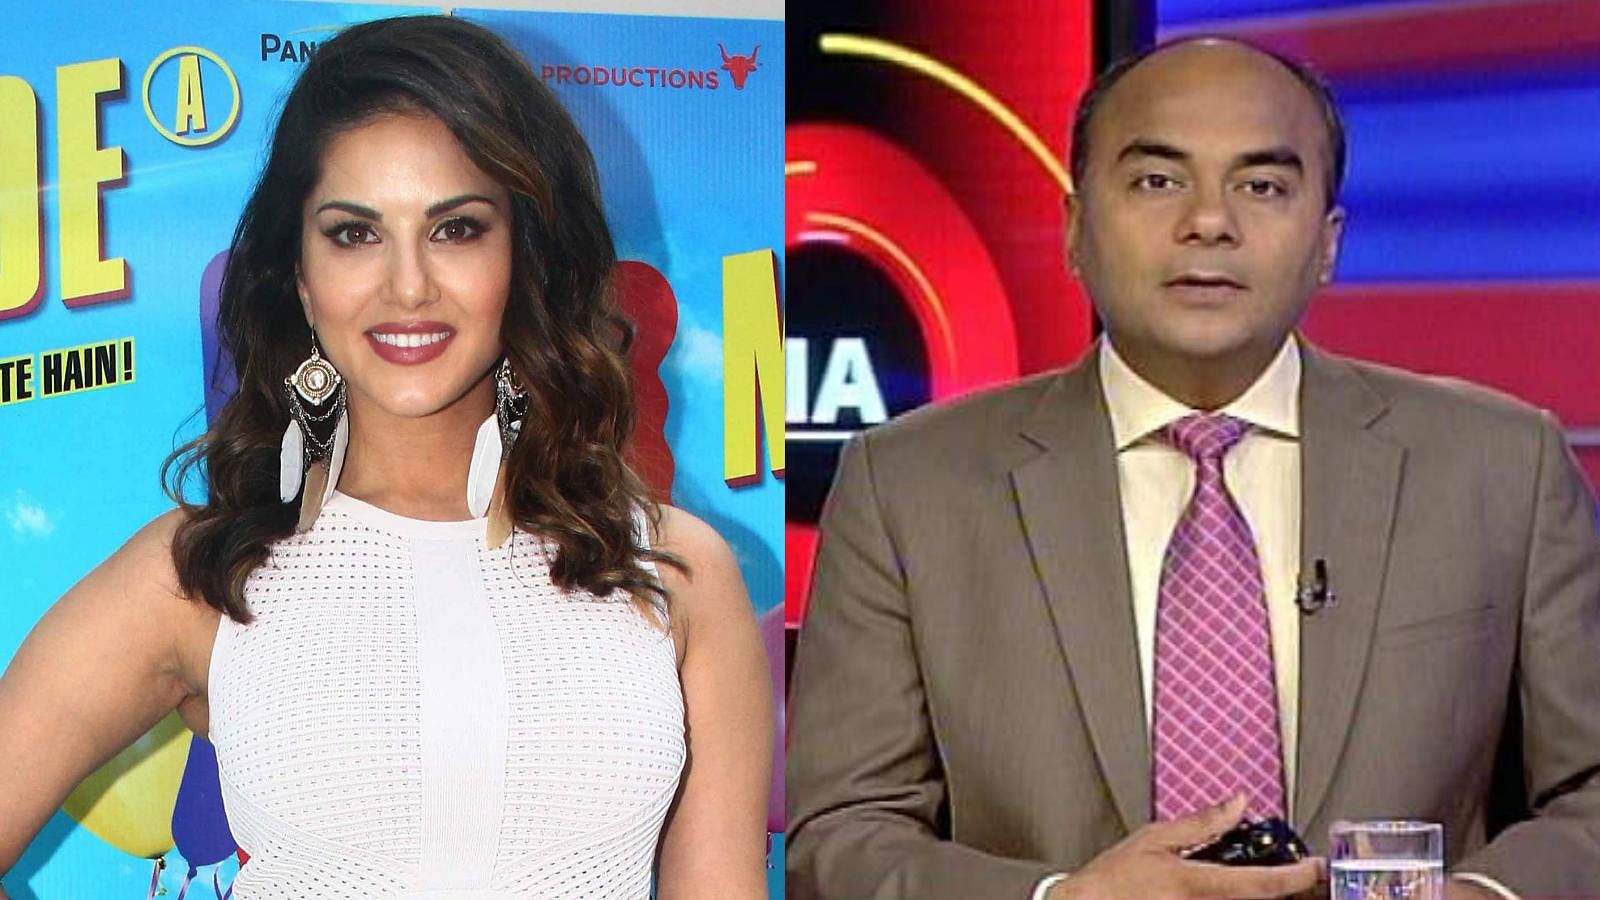 Sunny Leone turns into an overnight rockstar on Twitter after being interviewed by Bhupendra Chaubey (Photos: Yogen Shah; Youtube)